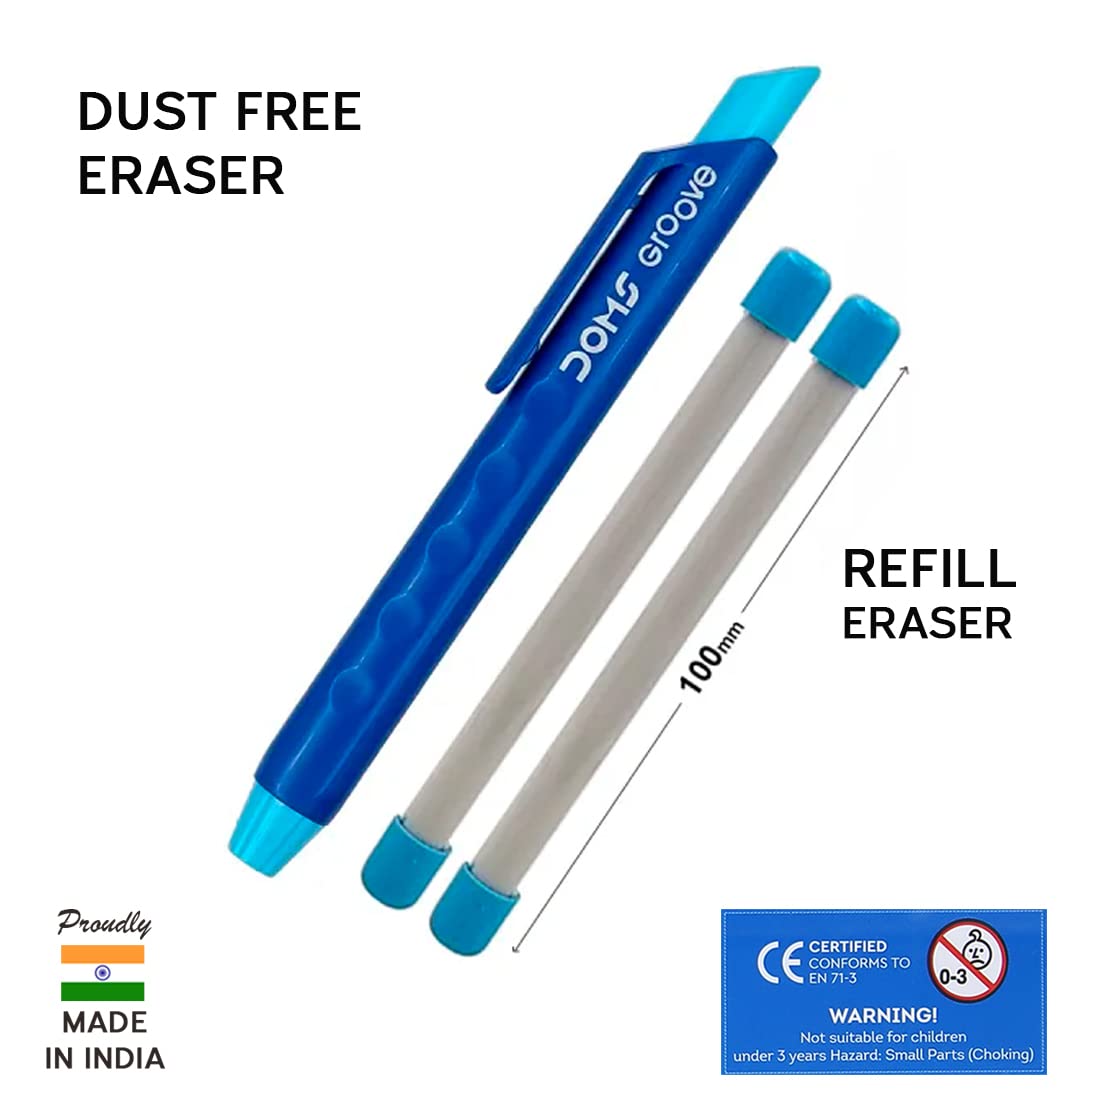 Doms Groove Retractable Eraser | Groove for Better Grip with Excellent Erasing Performance | Free 2 Refill Eraser with This Pack | Pack of 5